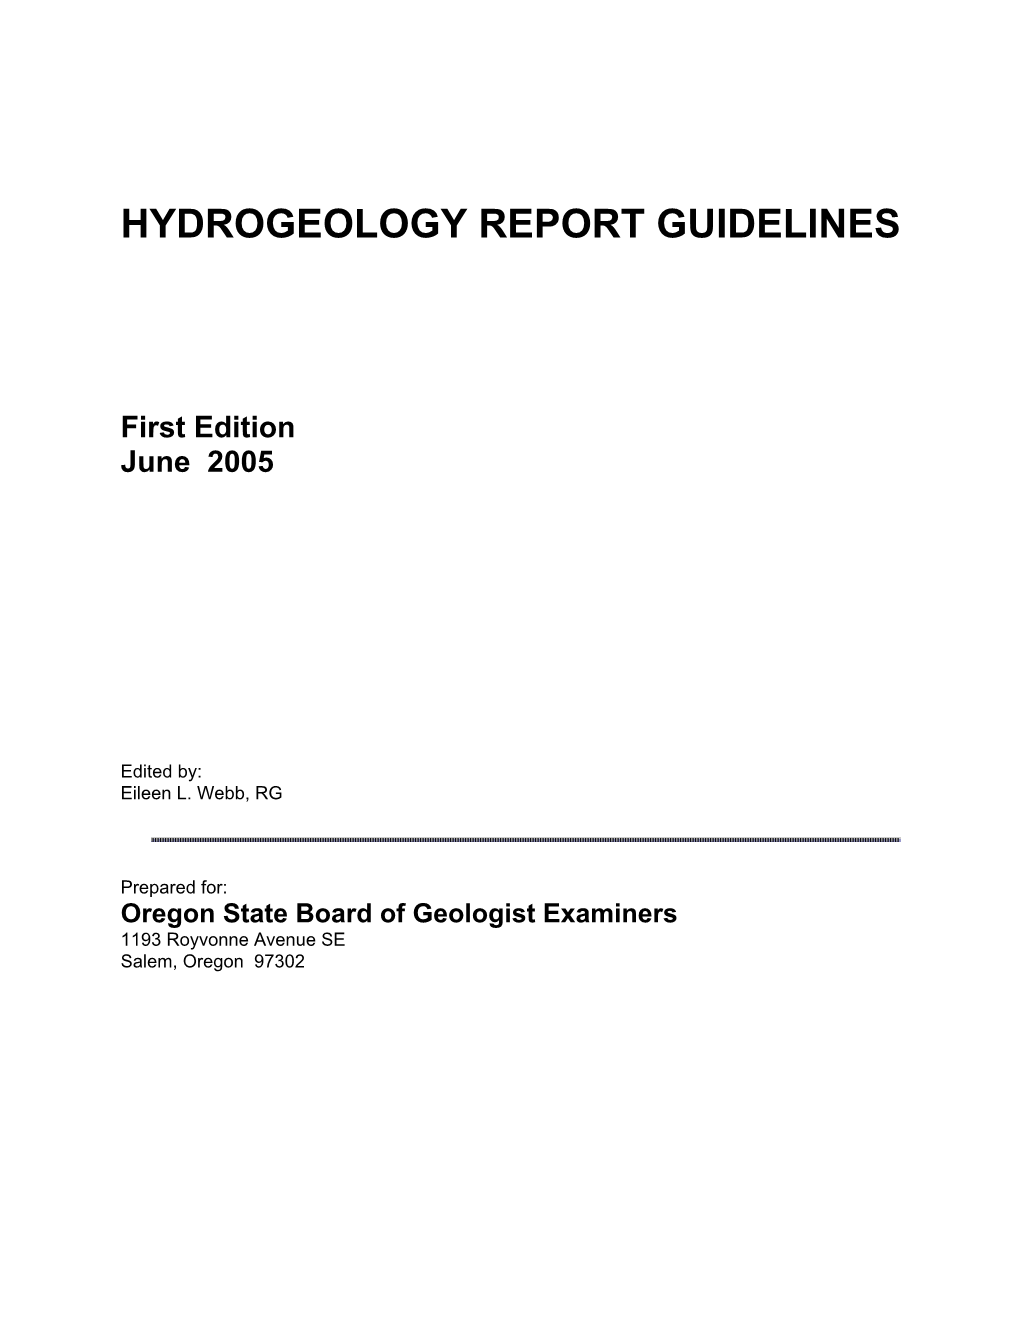 Hydrogeology Report Guidelines for State of Oregon